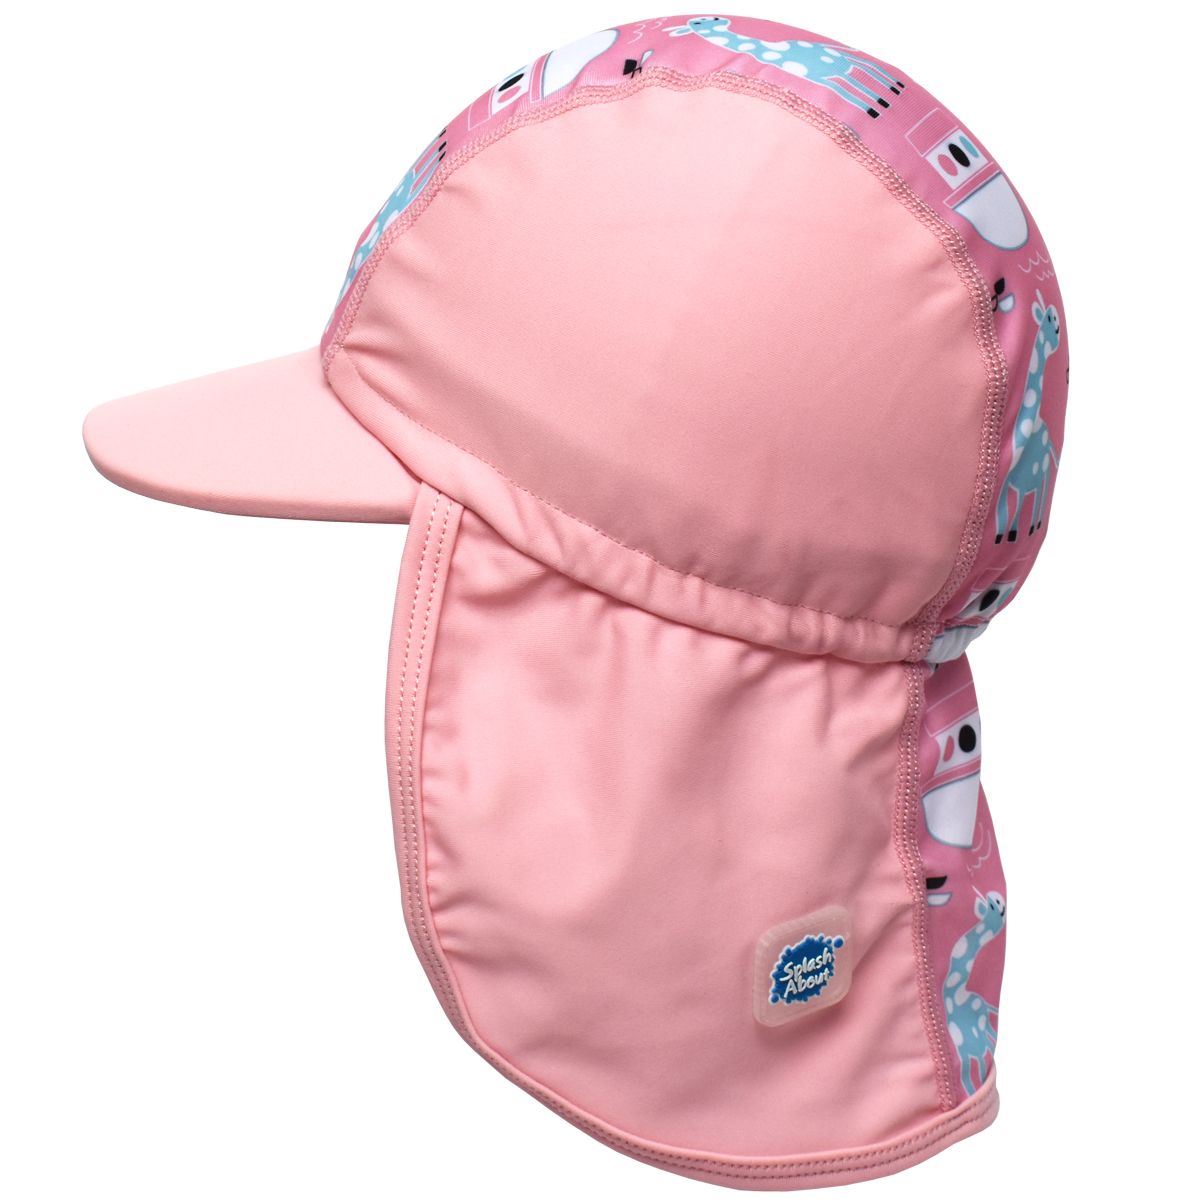 Legionnaire style sun hat in baby pink, with Noah's Ark themed print panel including giraffes, zebras, flamingos and more. Side.